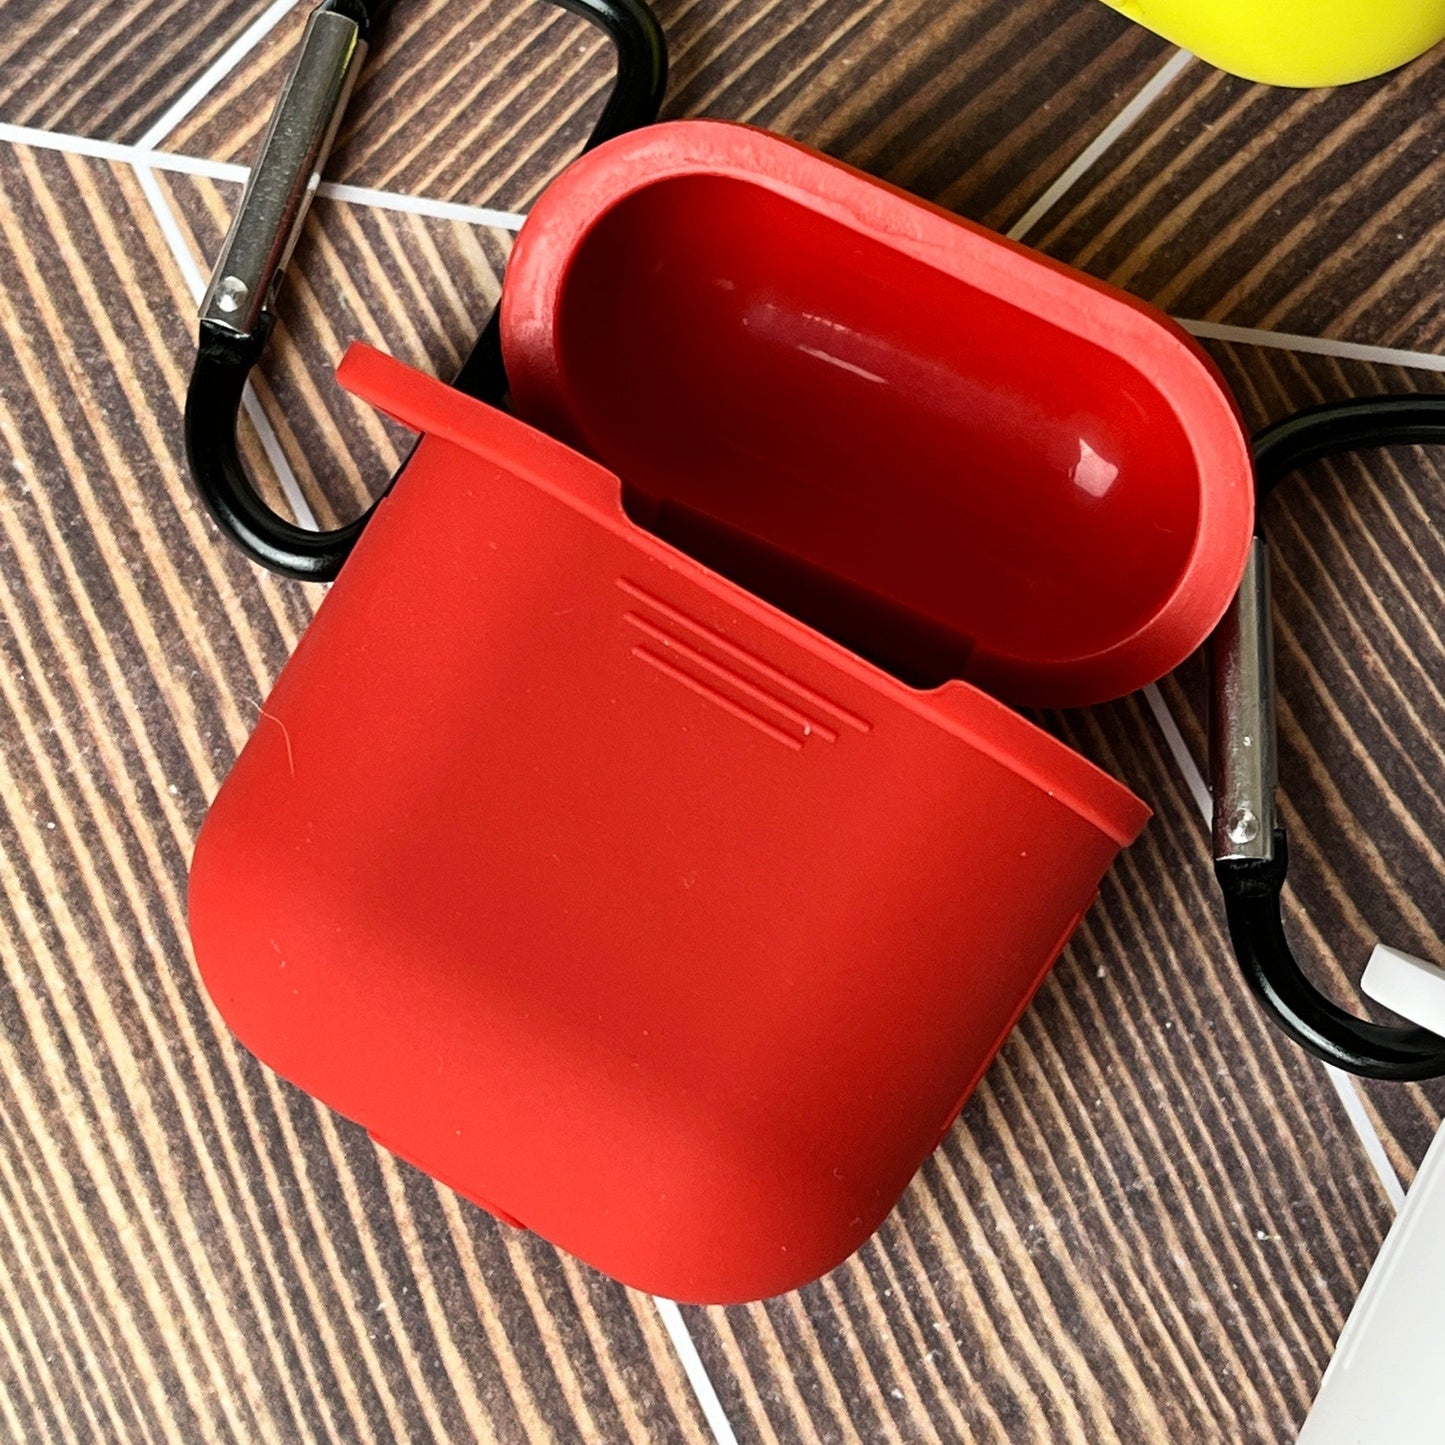 Silicone Airpod Case for Generation 1 or 2 with Clip - CLEARANCE